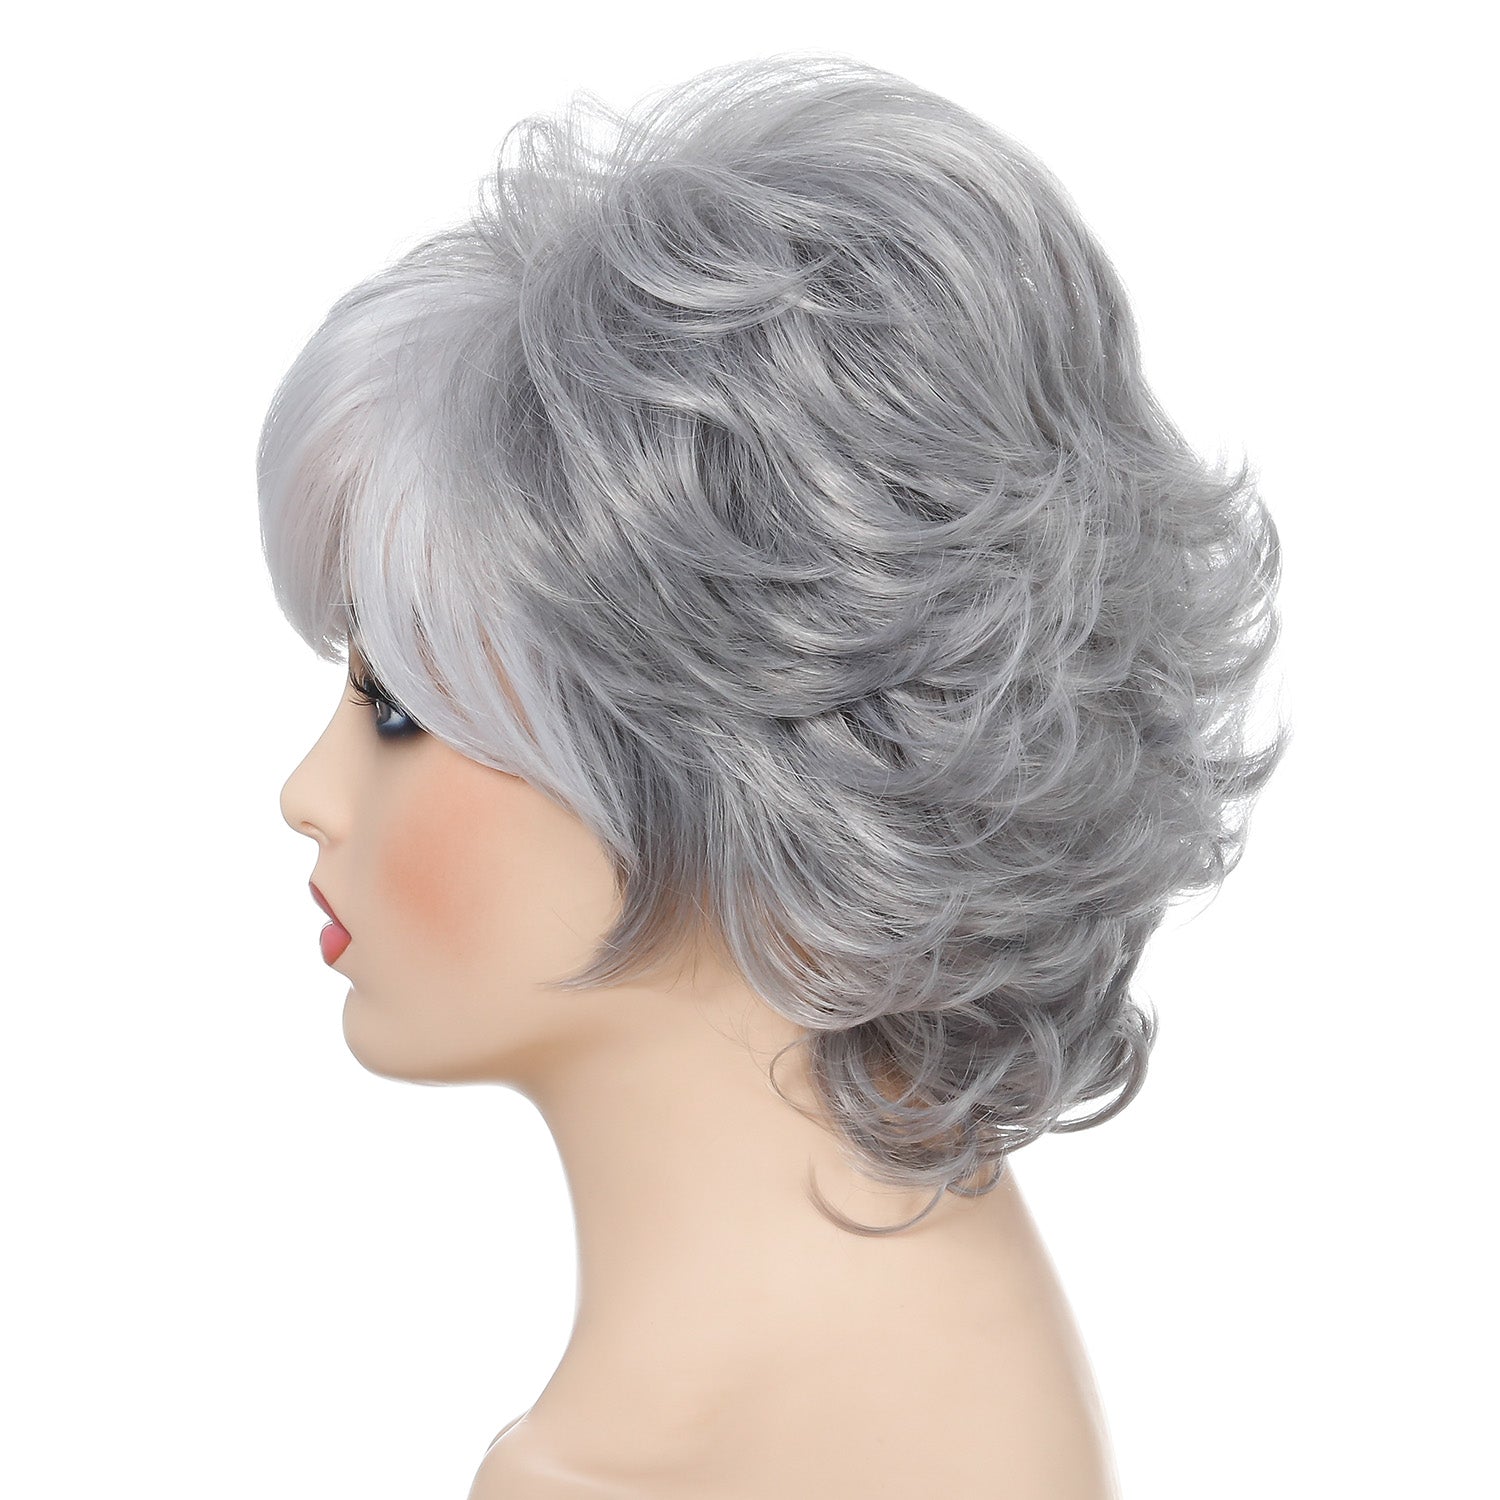 Tuesday | Grey Short Pixie Cut Wavy Synthetic Hair Wig With Bangs